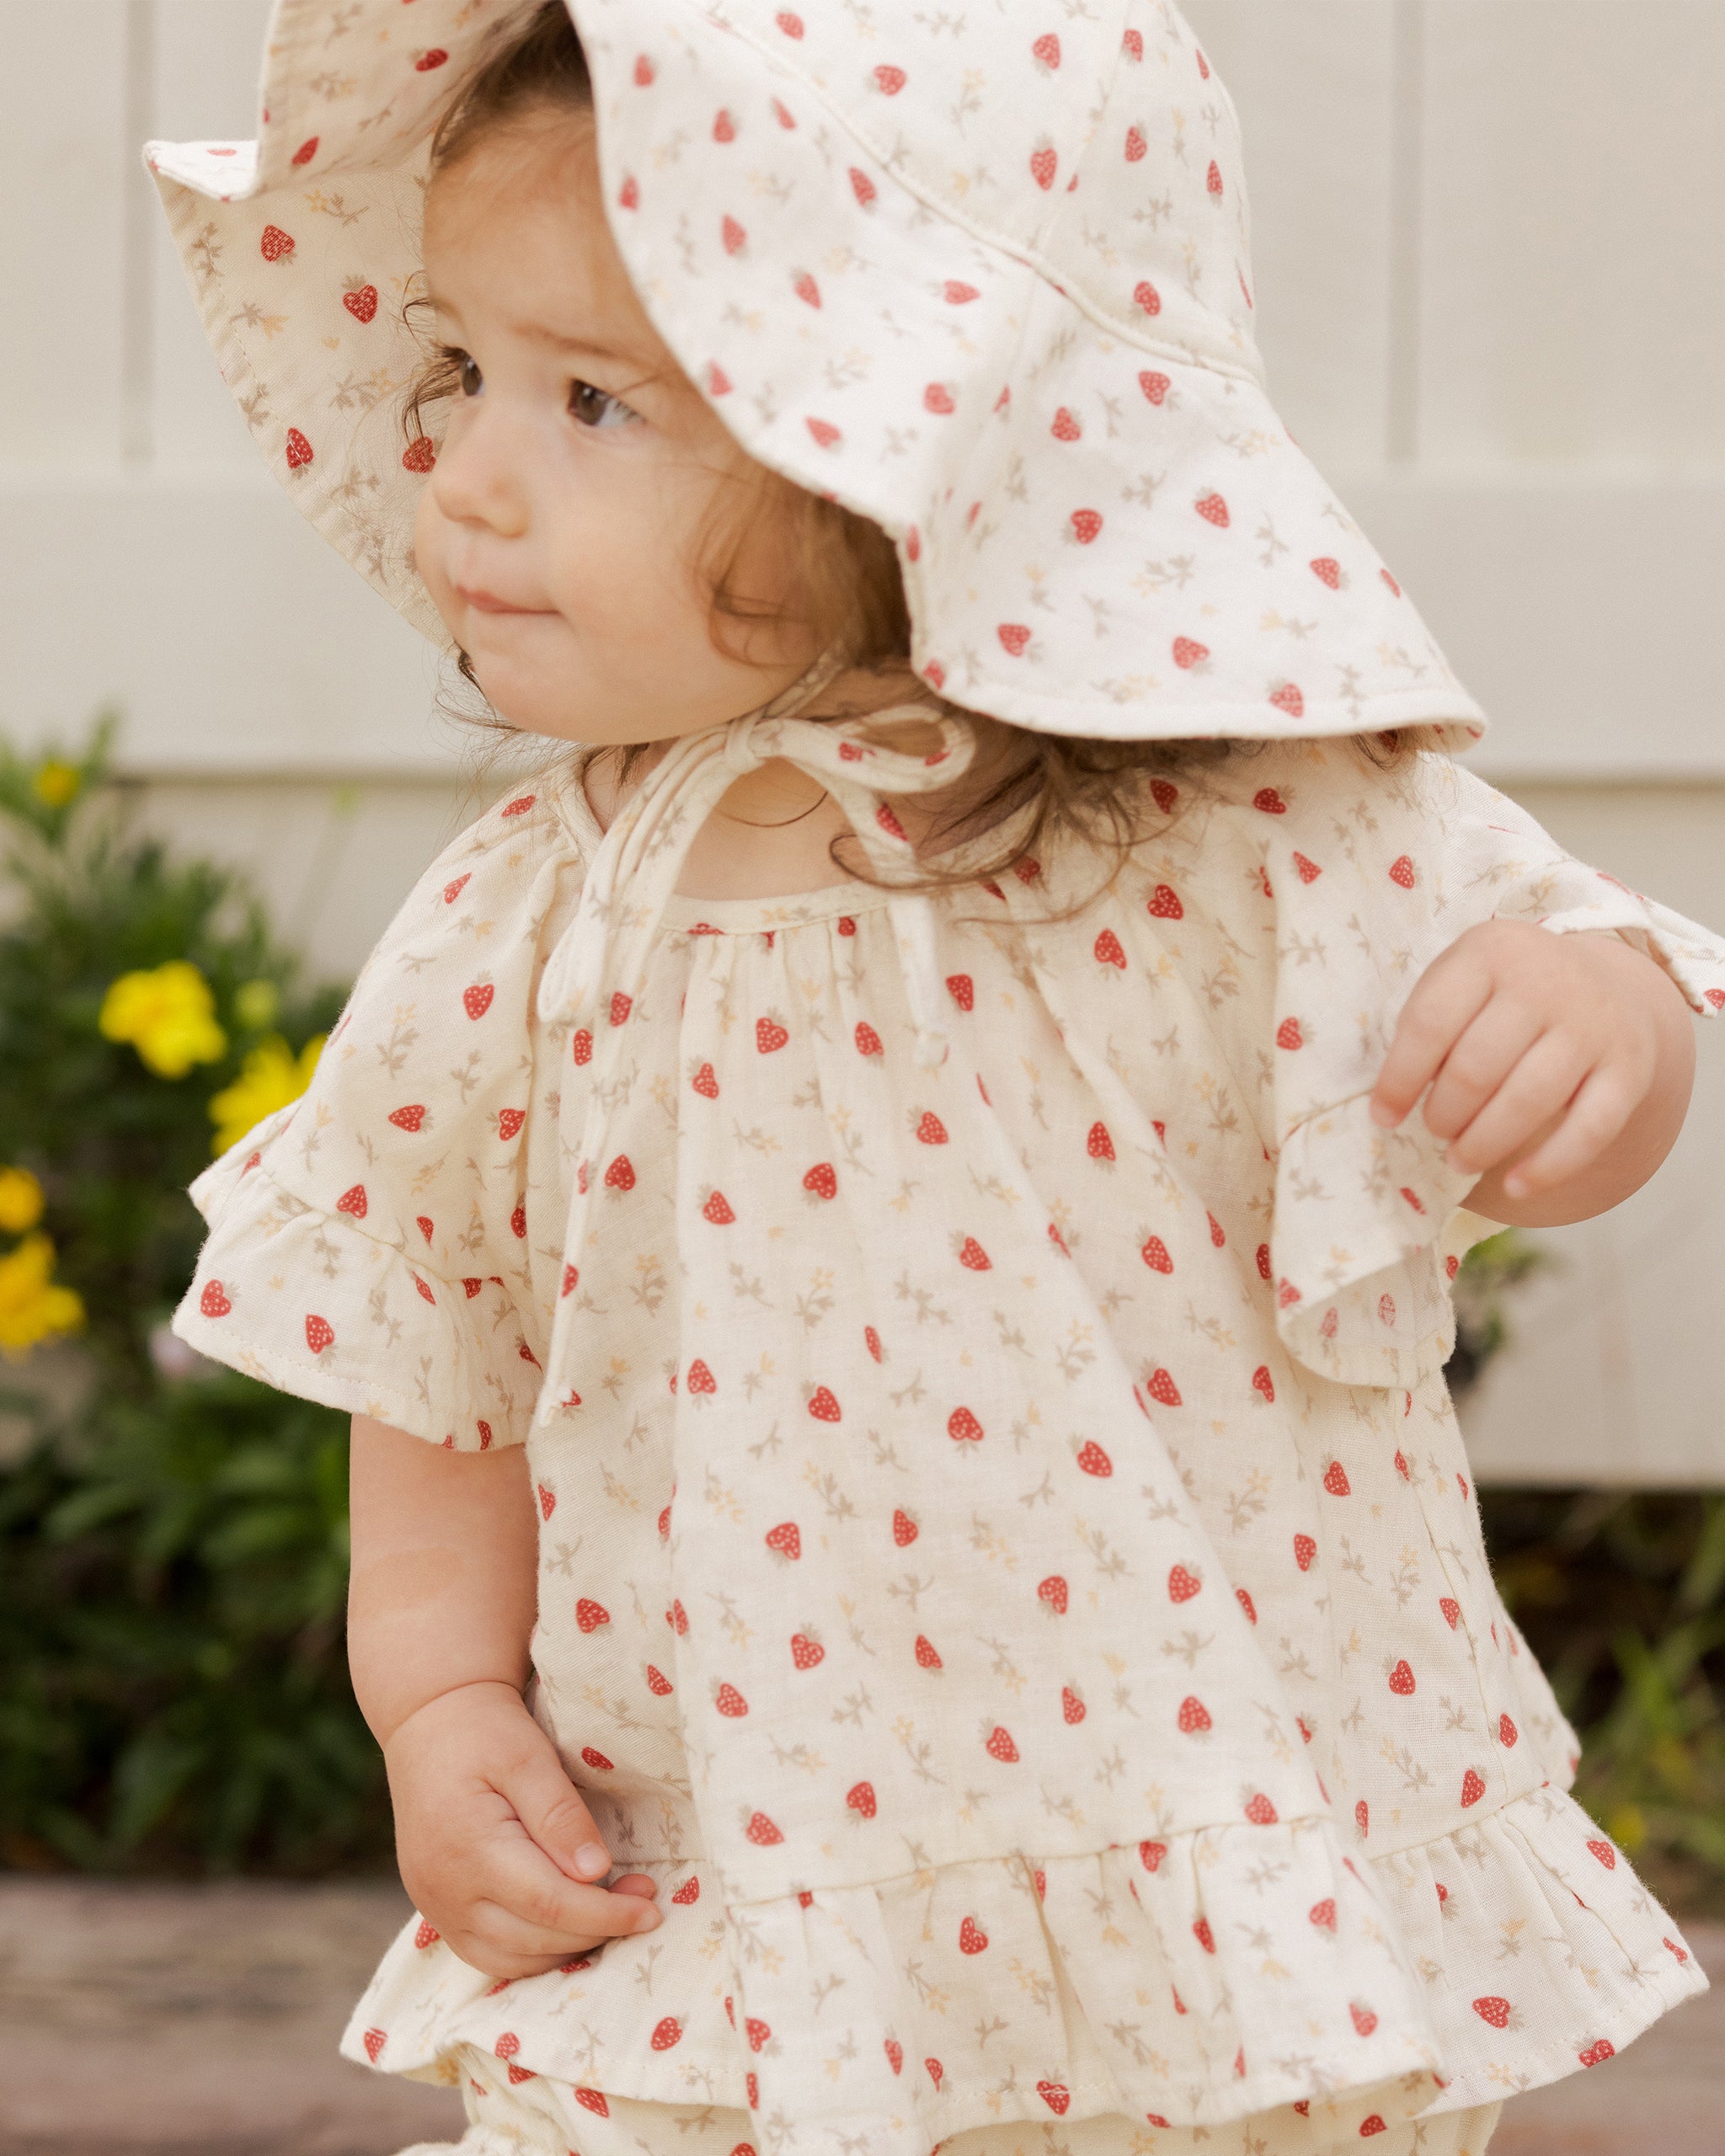 Butterfly Top + Bloomer Set || Strawberry Fields - Rylee + Cru | Kids Clothes | Trendy Baby Clothes | Modern Infant Outfits |